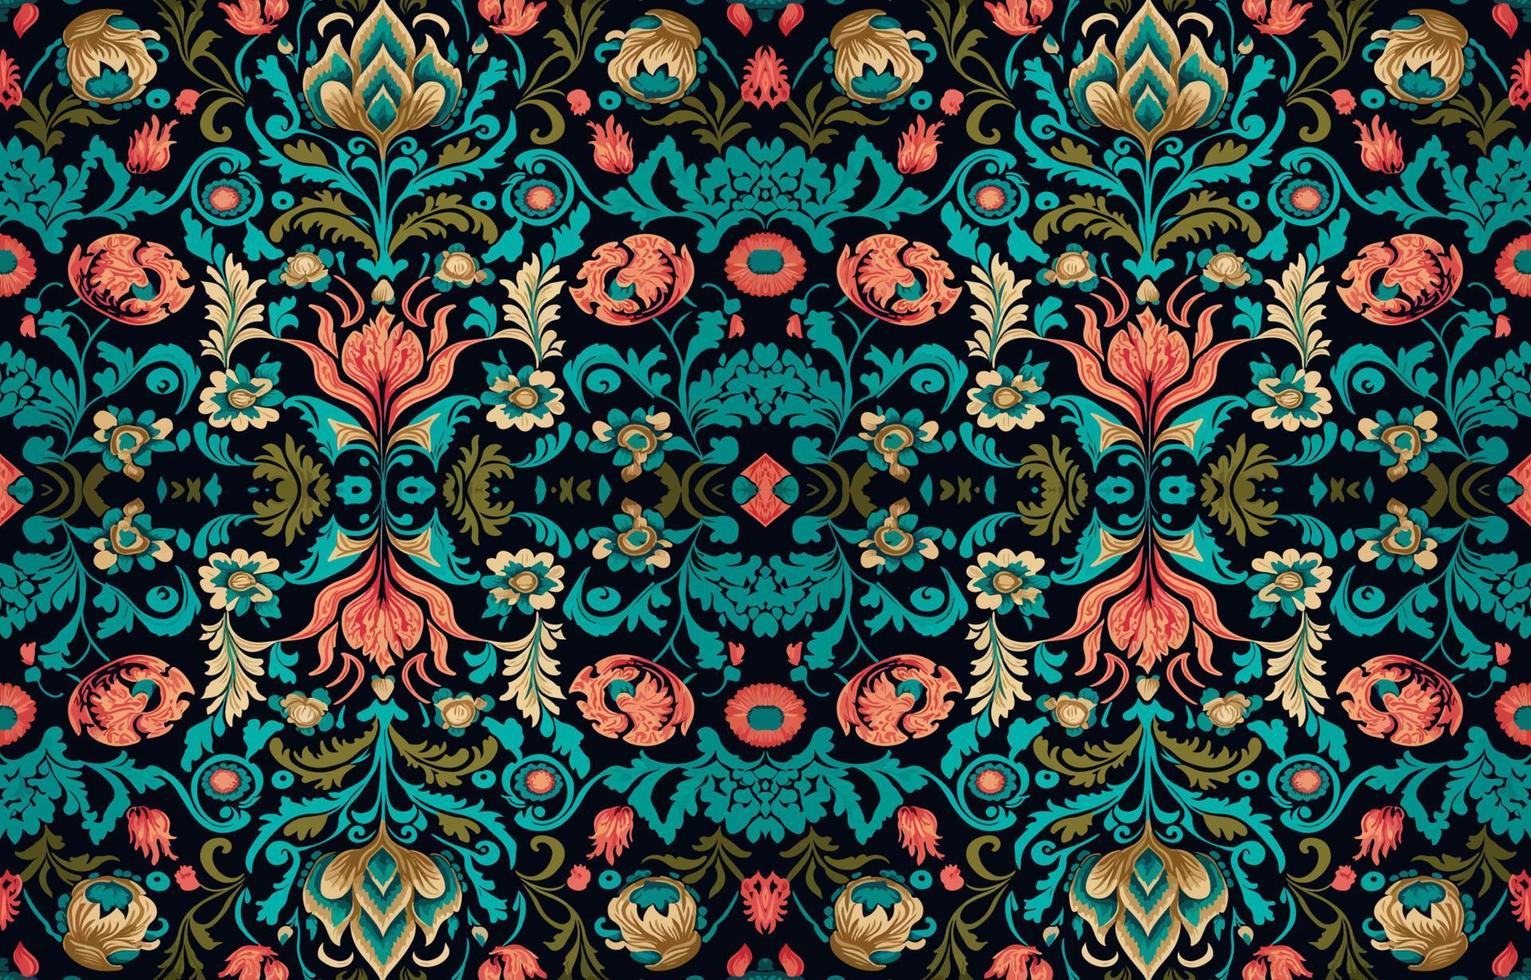 Floral seamless fabric pattern. Abstract fabric textile line graphic flower antique. Ethnic flowers vector ornate elegant luxury vintage retro style. Floral art print design for textile, clothing.